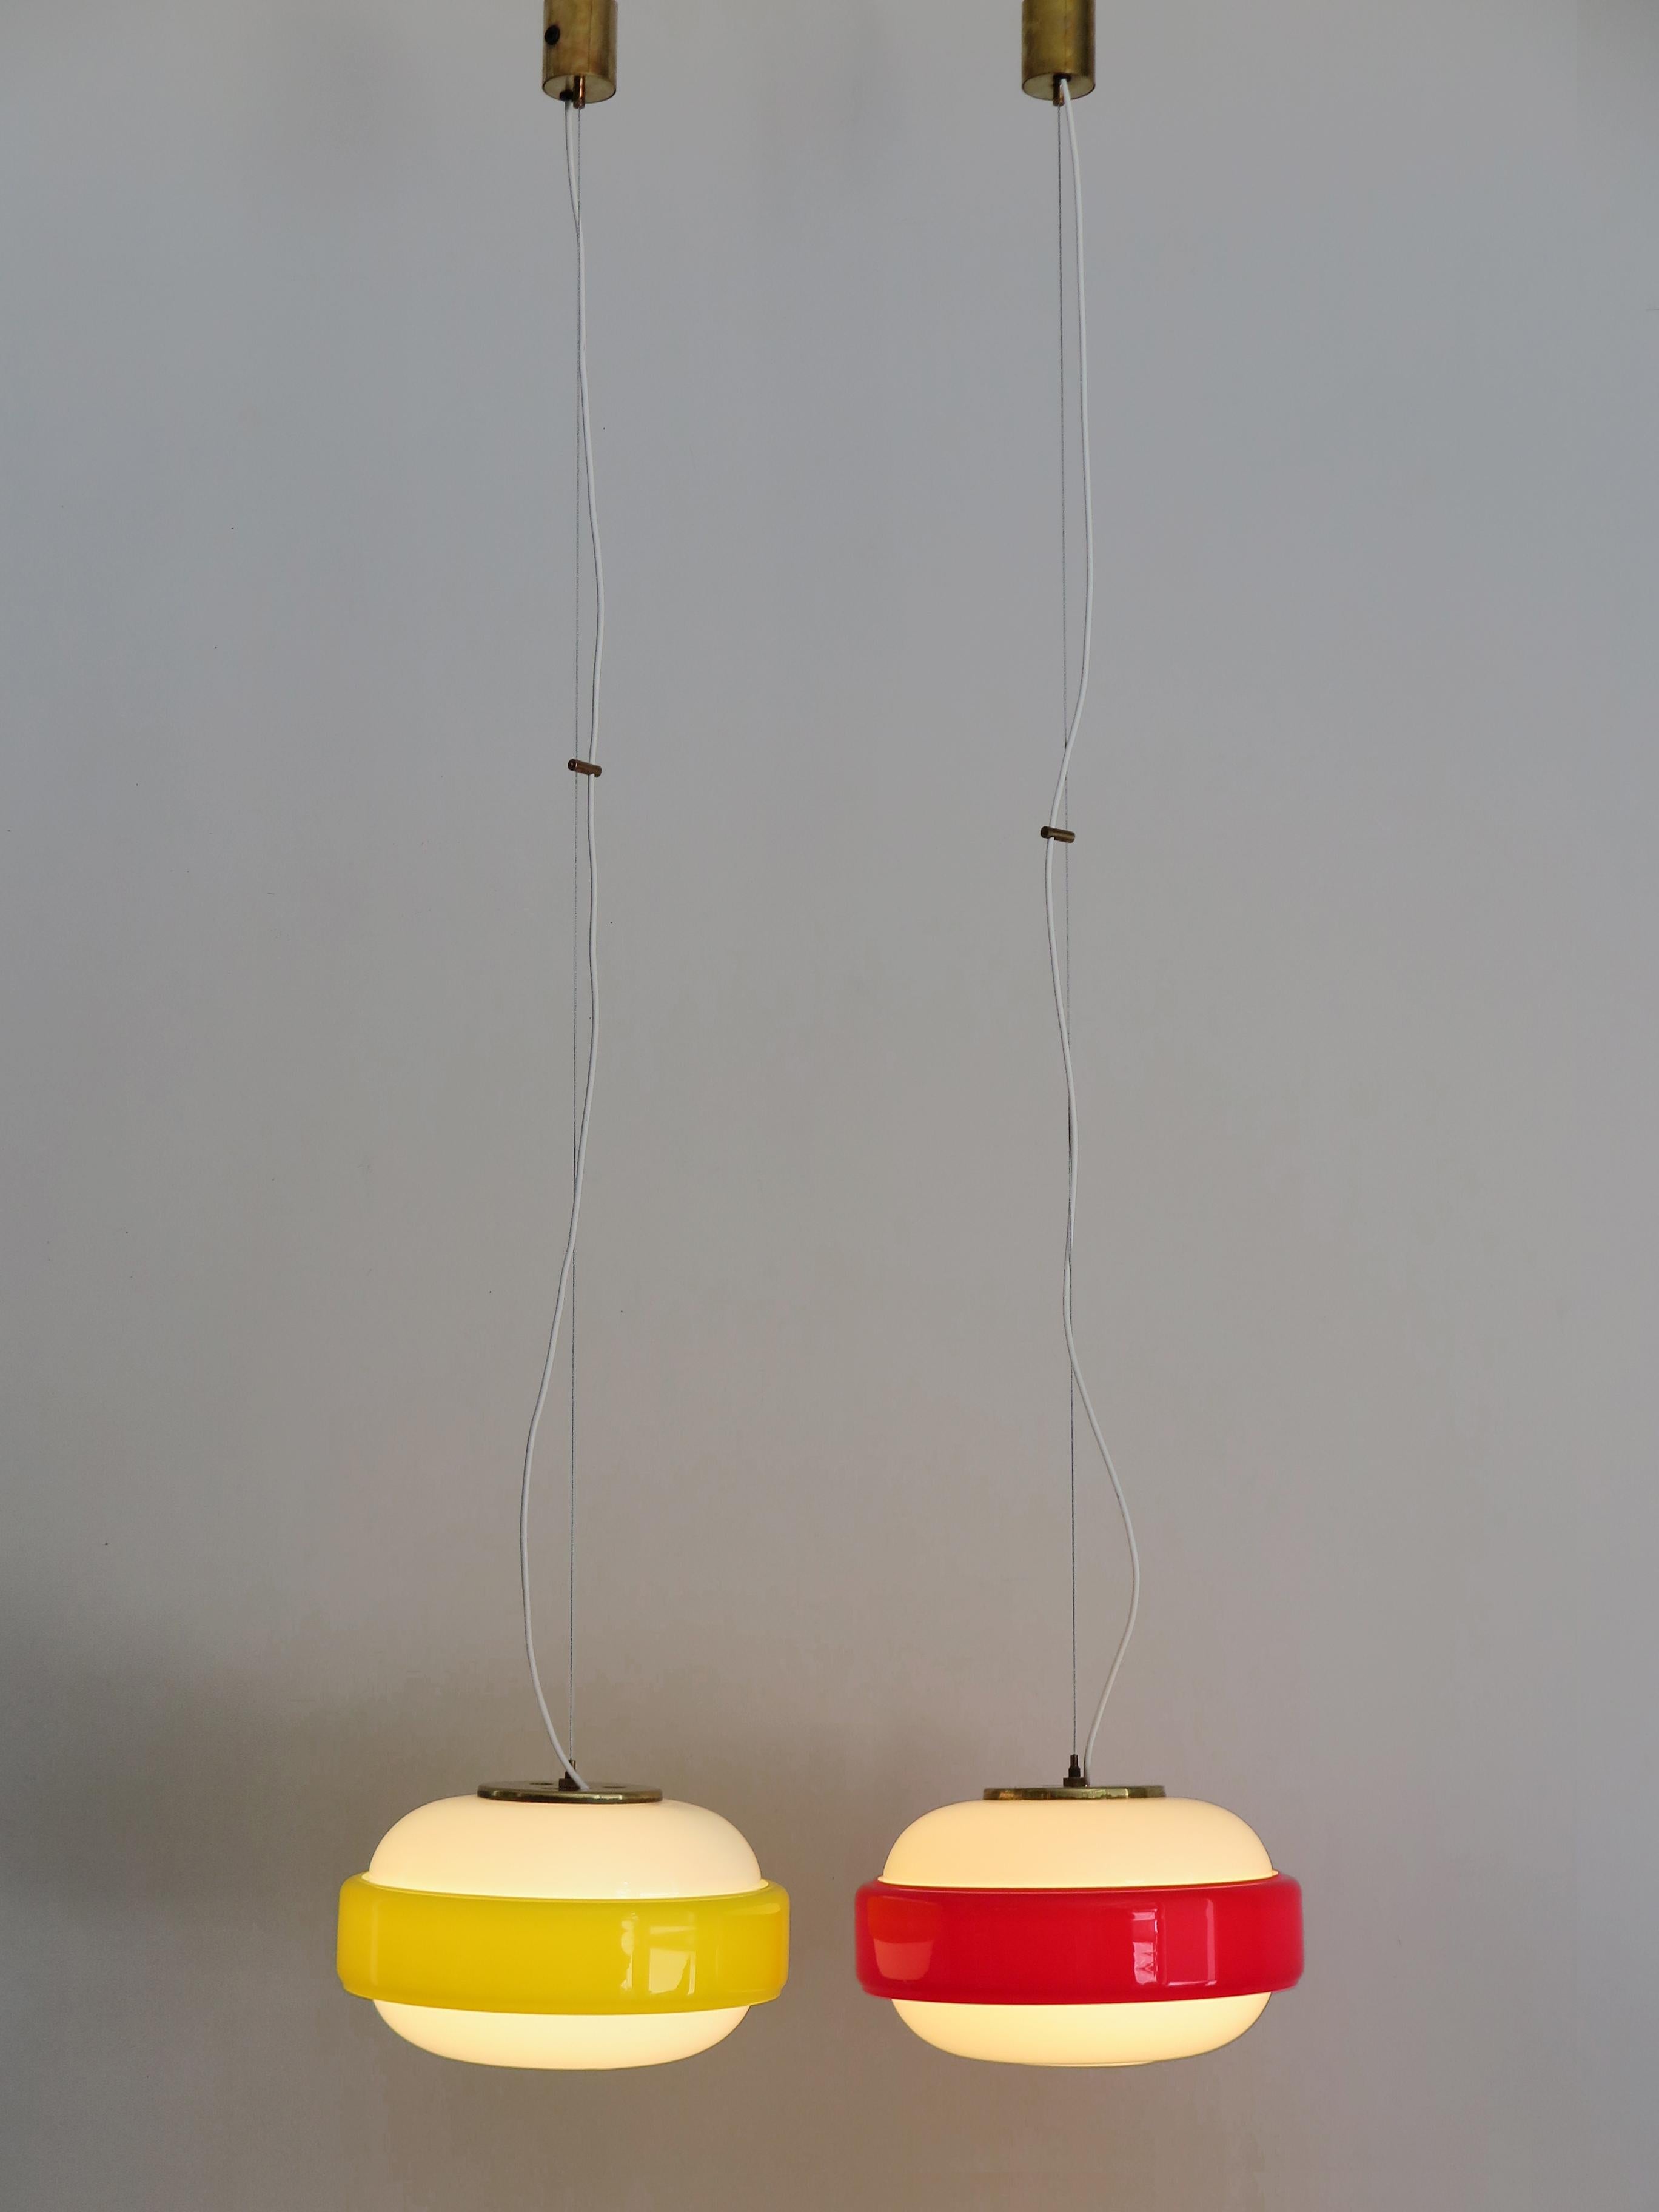 Set of two of Italian amazing pendant lamps or hanging lights produced by Stilnovo from 1960; brass, white opaline glasses and incamiciato yellow and red glasses; original Stilnovo label, circa 1960s.

Please note that the lamps are original of